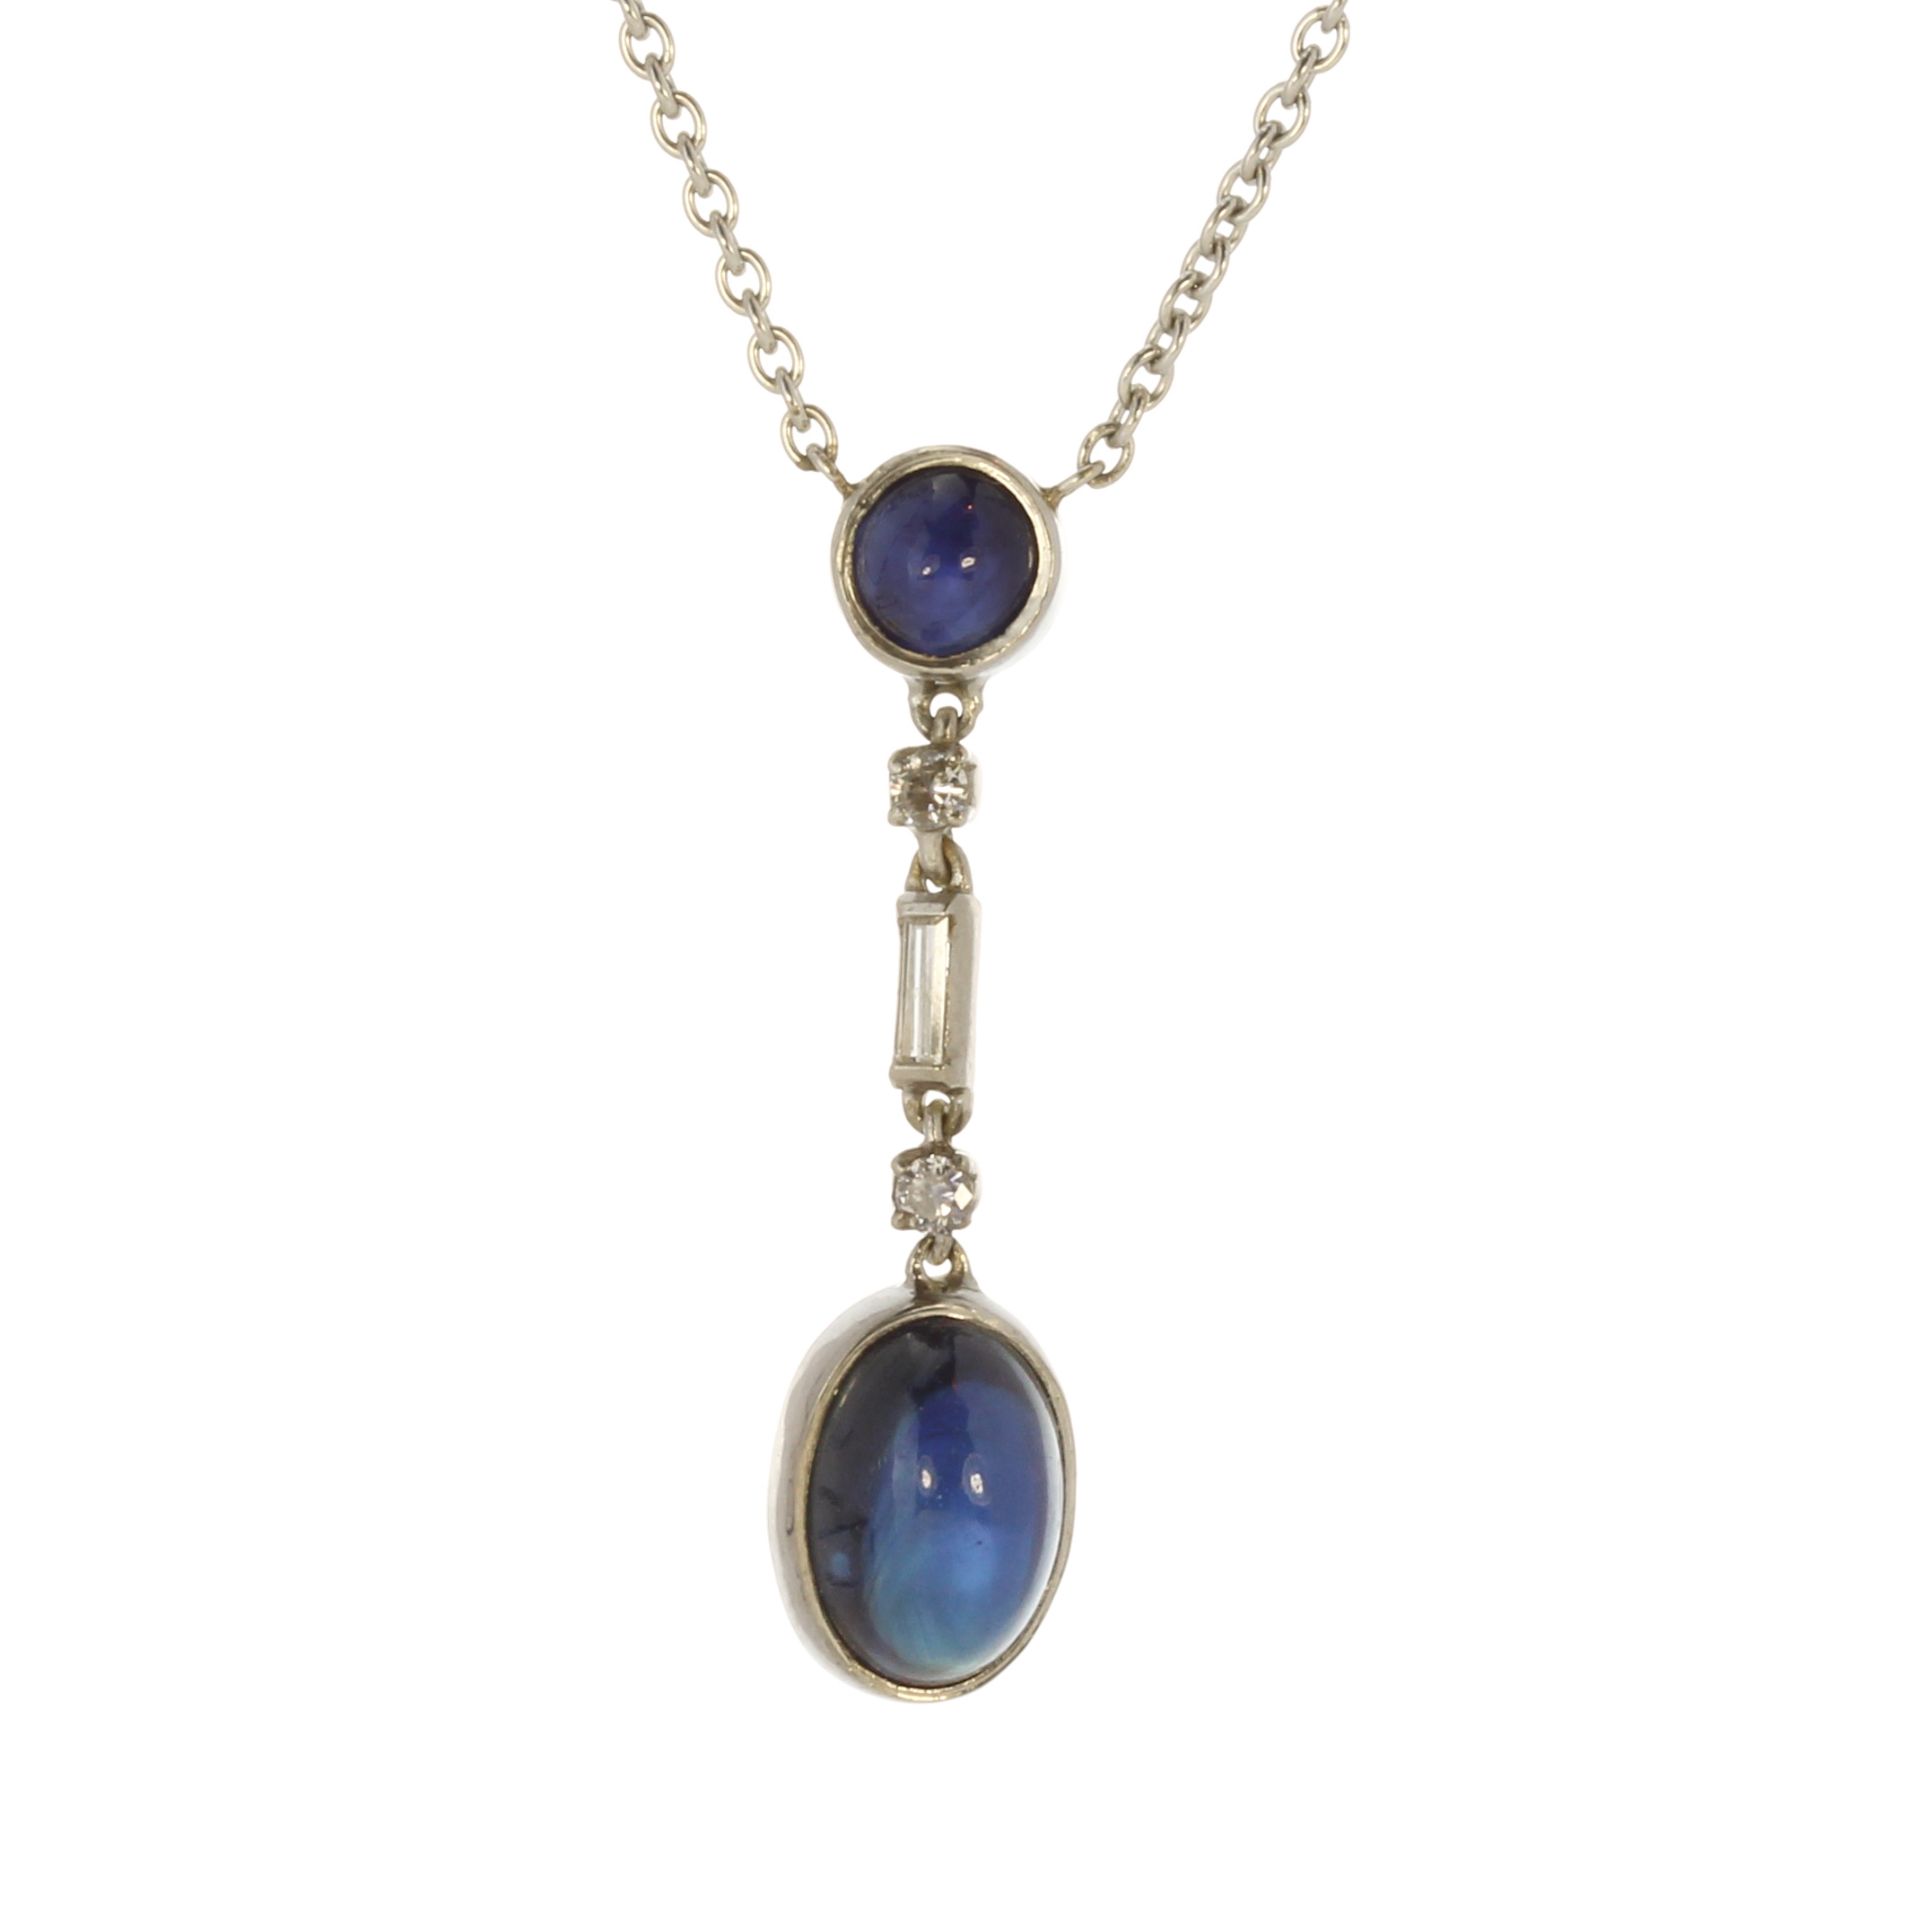 A sapphire and diamond necklace in white gold or platinum set with a large, oval cabochon blue